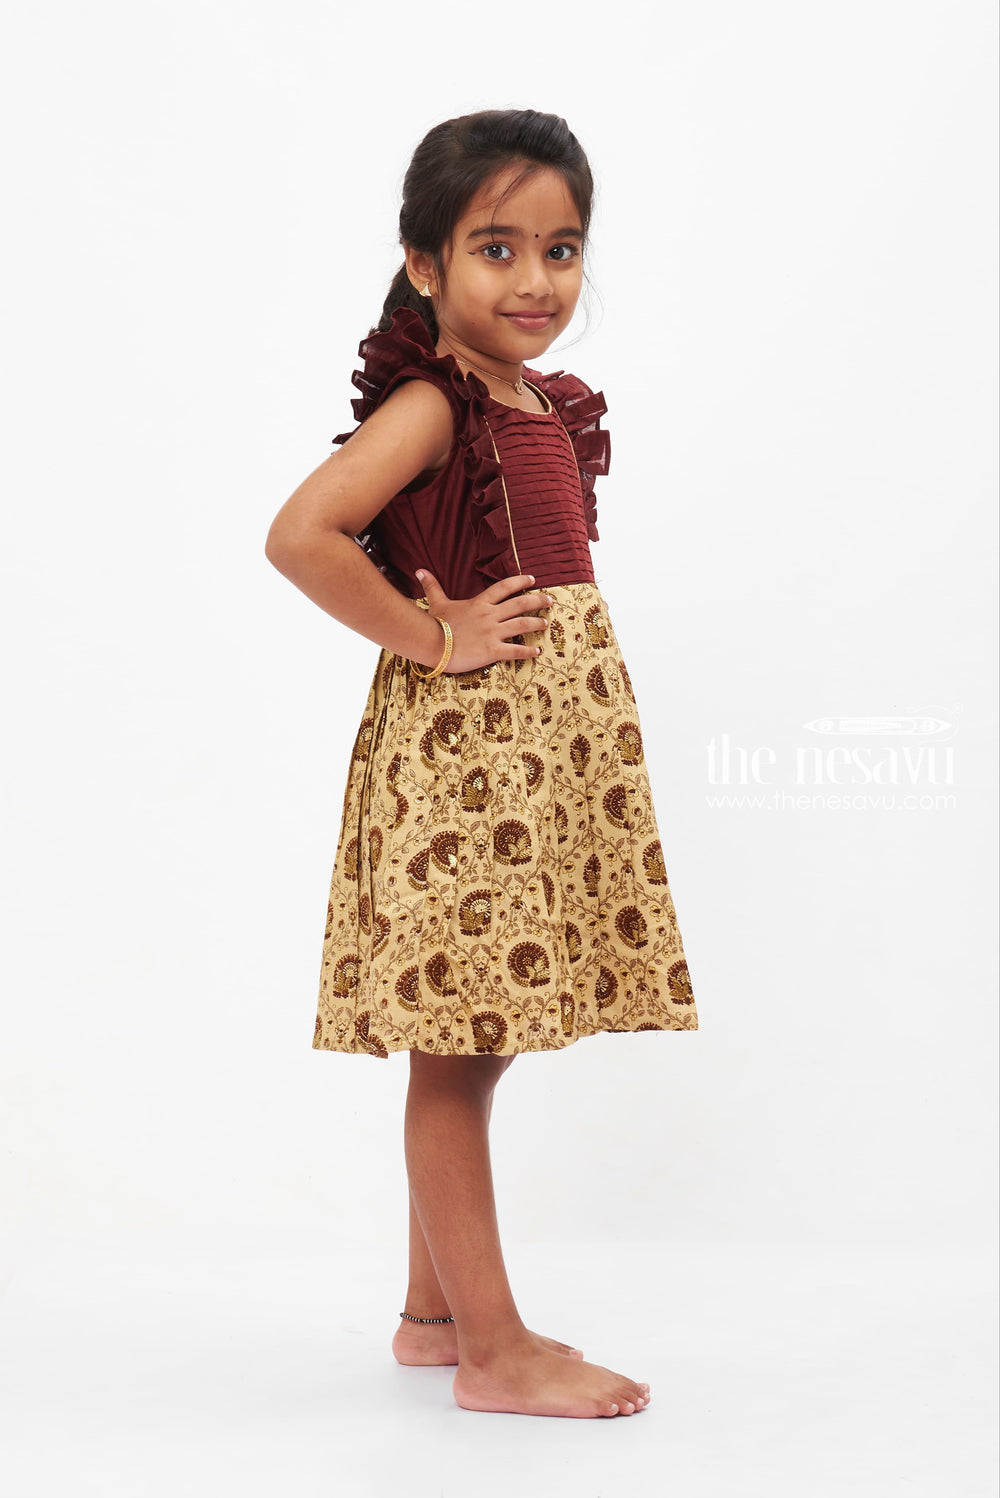 The Nesavu Baby Cotton Frocks Brown Elegance Ruffled Frock with Beige Paisley Print for Babies Nesavu Baby's Brown Cotton Frock with Paisley Print | Little Girls Traditional | The Nesavu